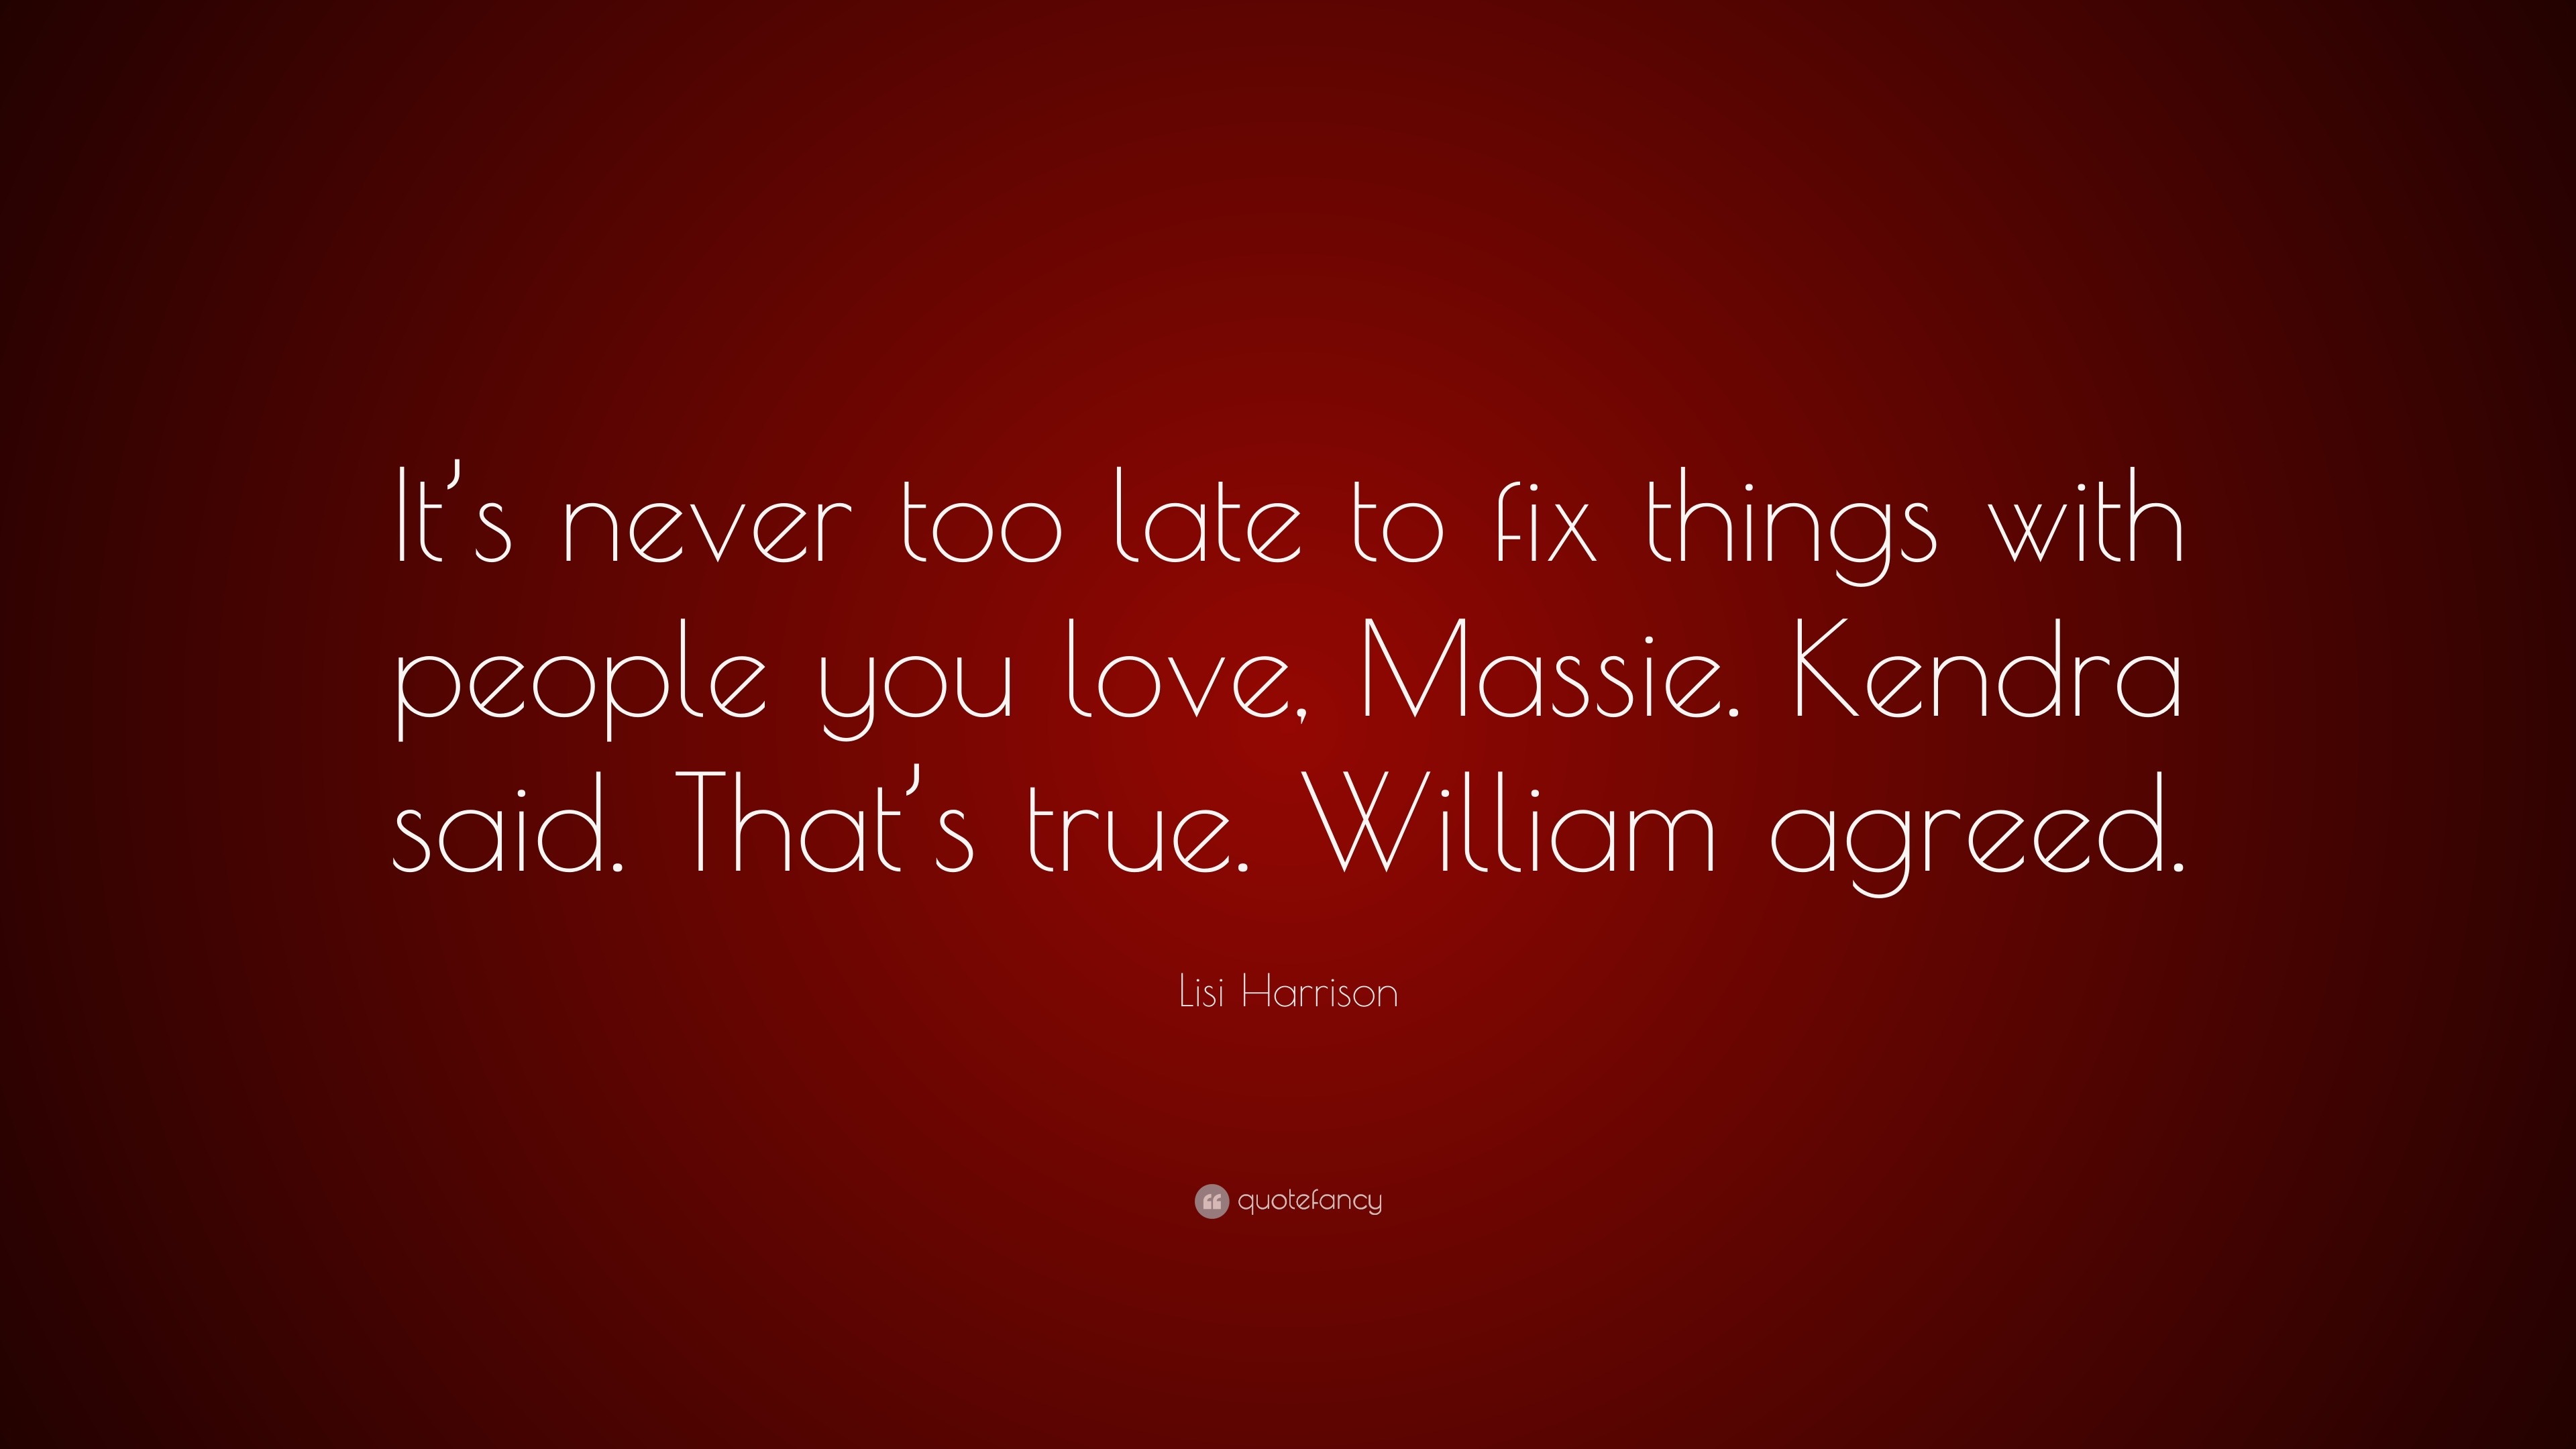 Lisi Harrison Quote “It s never too late to fix things with people you love